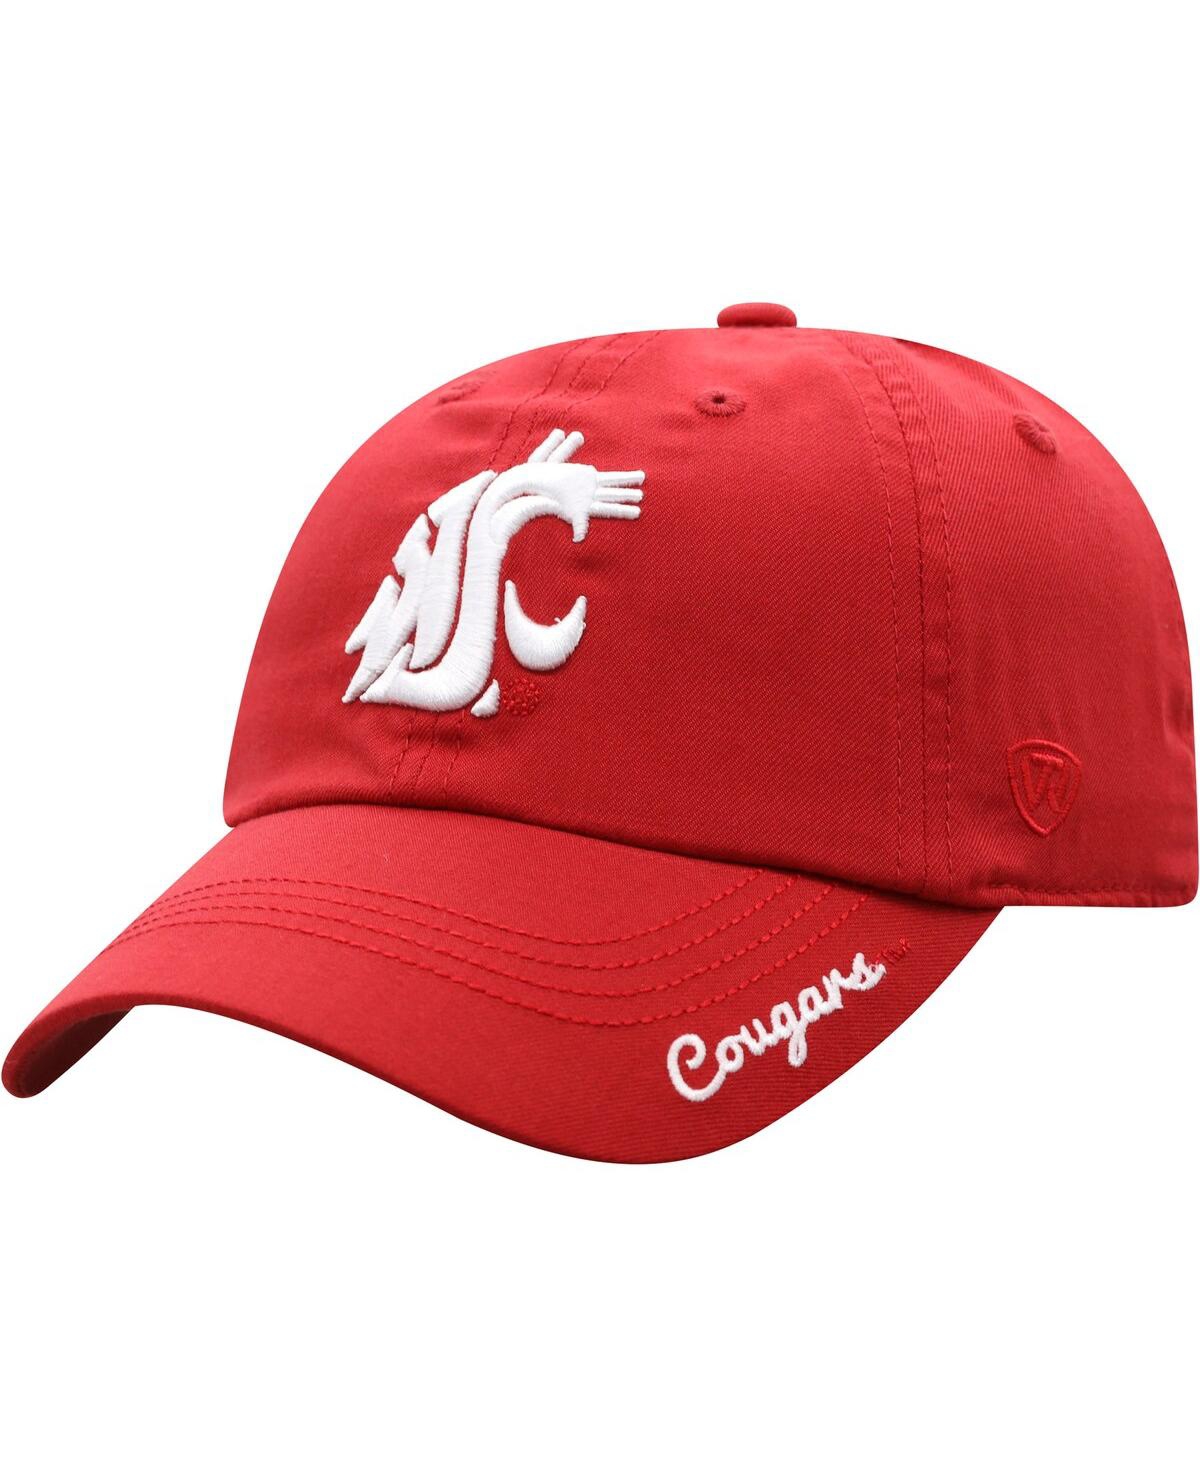 Top Of The World Women's  Cardinal Washington State Cougars Staple Adjustable Hat